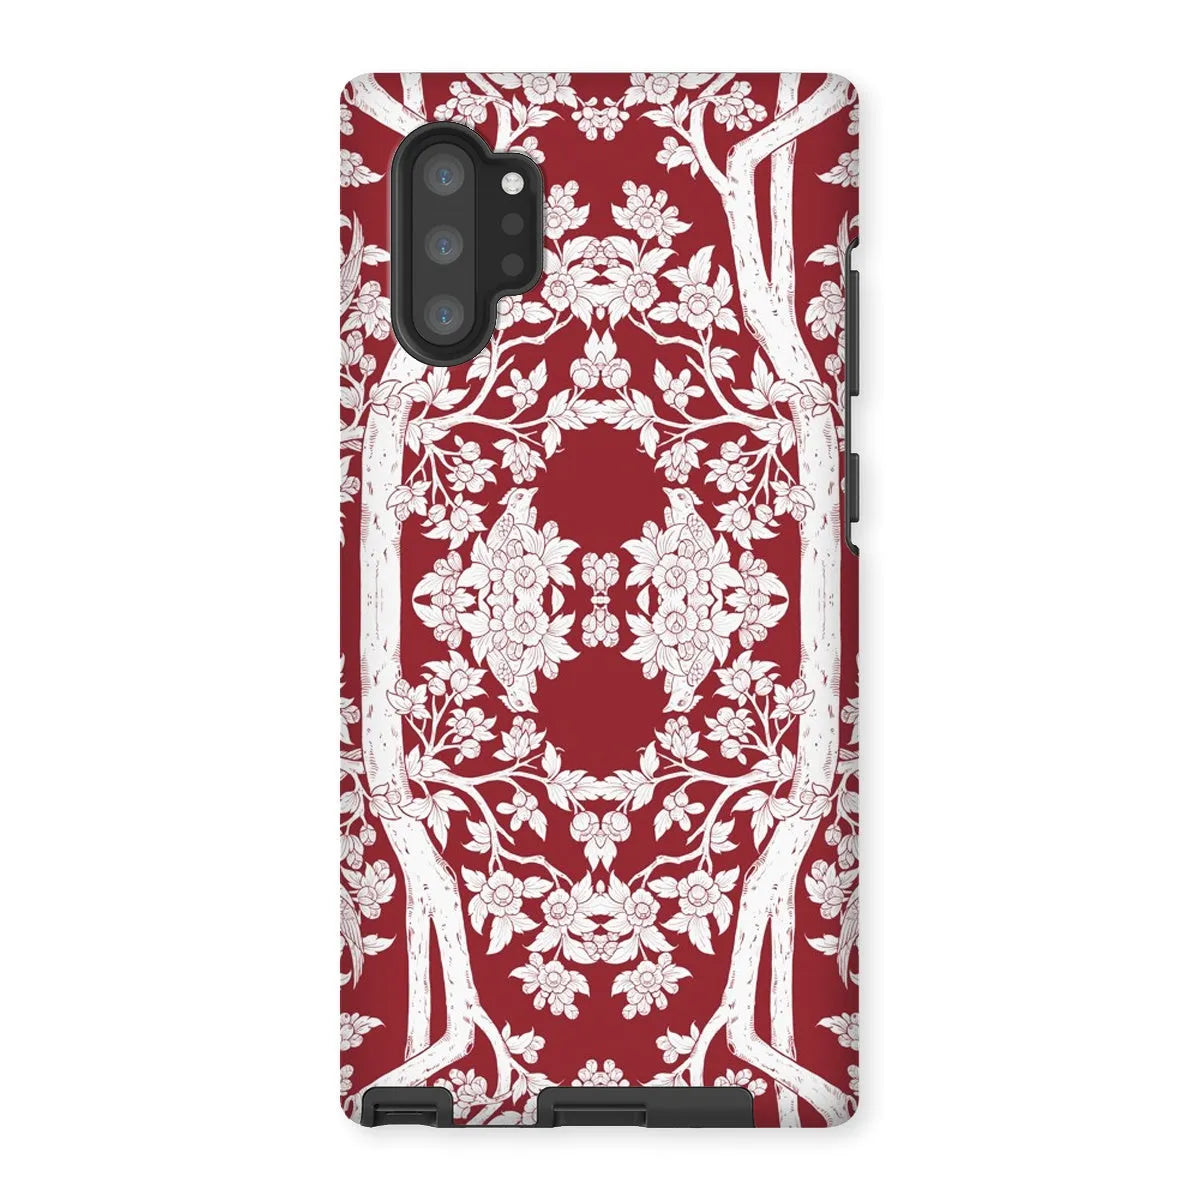 Aviary Red Aesthetic Pattern Art Phone Case - Samsung Galaxy Note 10p / Matte - Mobile Phone Cases - Aesthetic Art